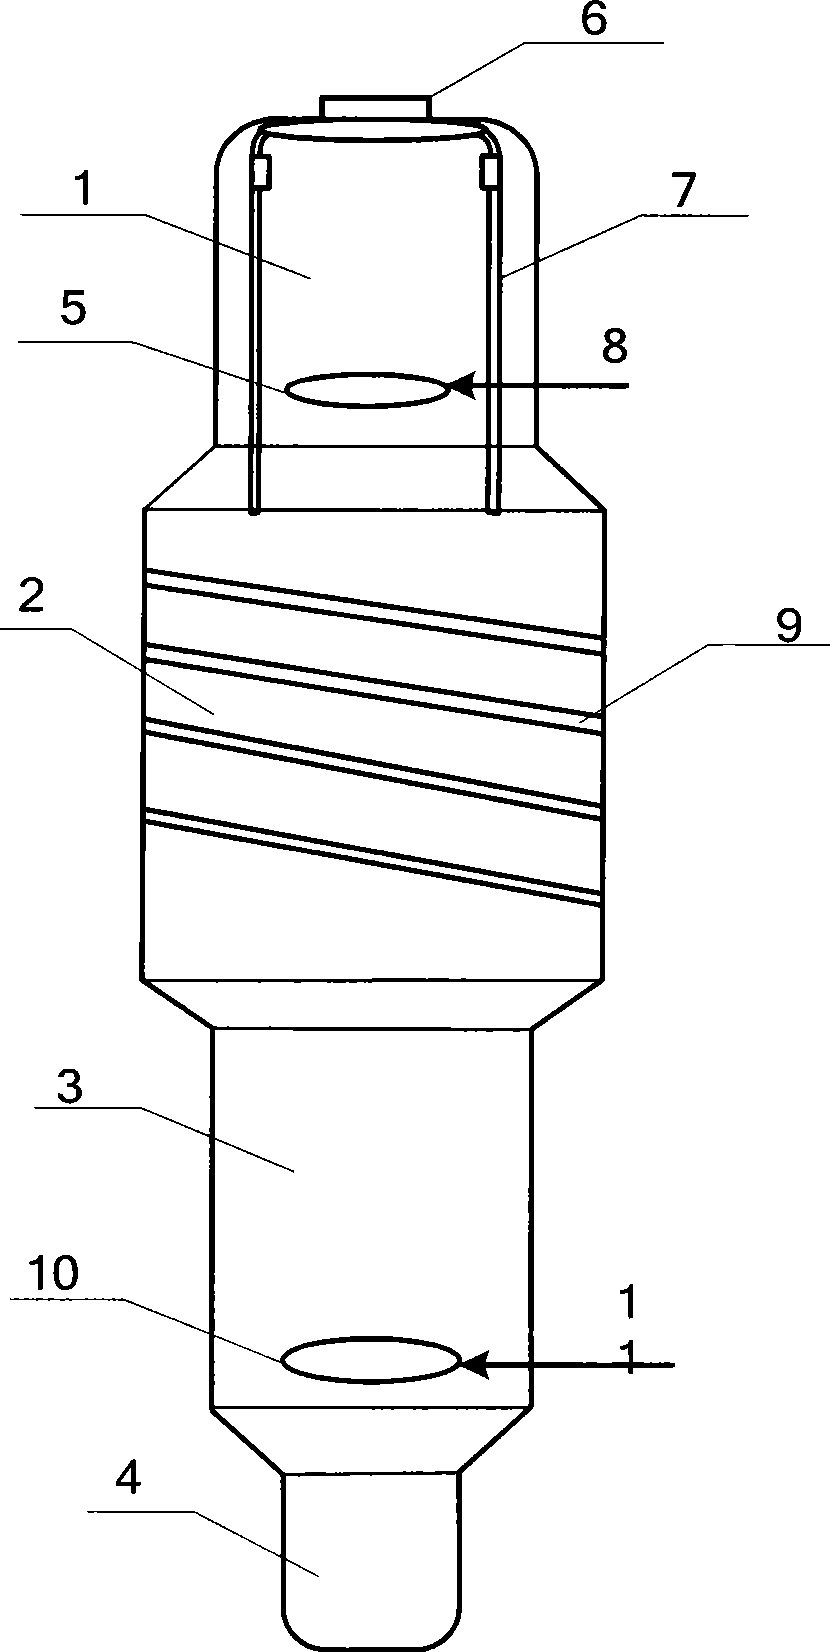 Method for combination processing heavy oil by pyrolysis and gasification